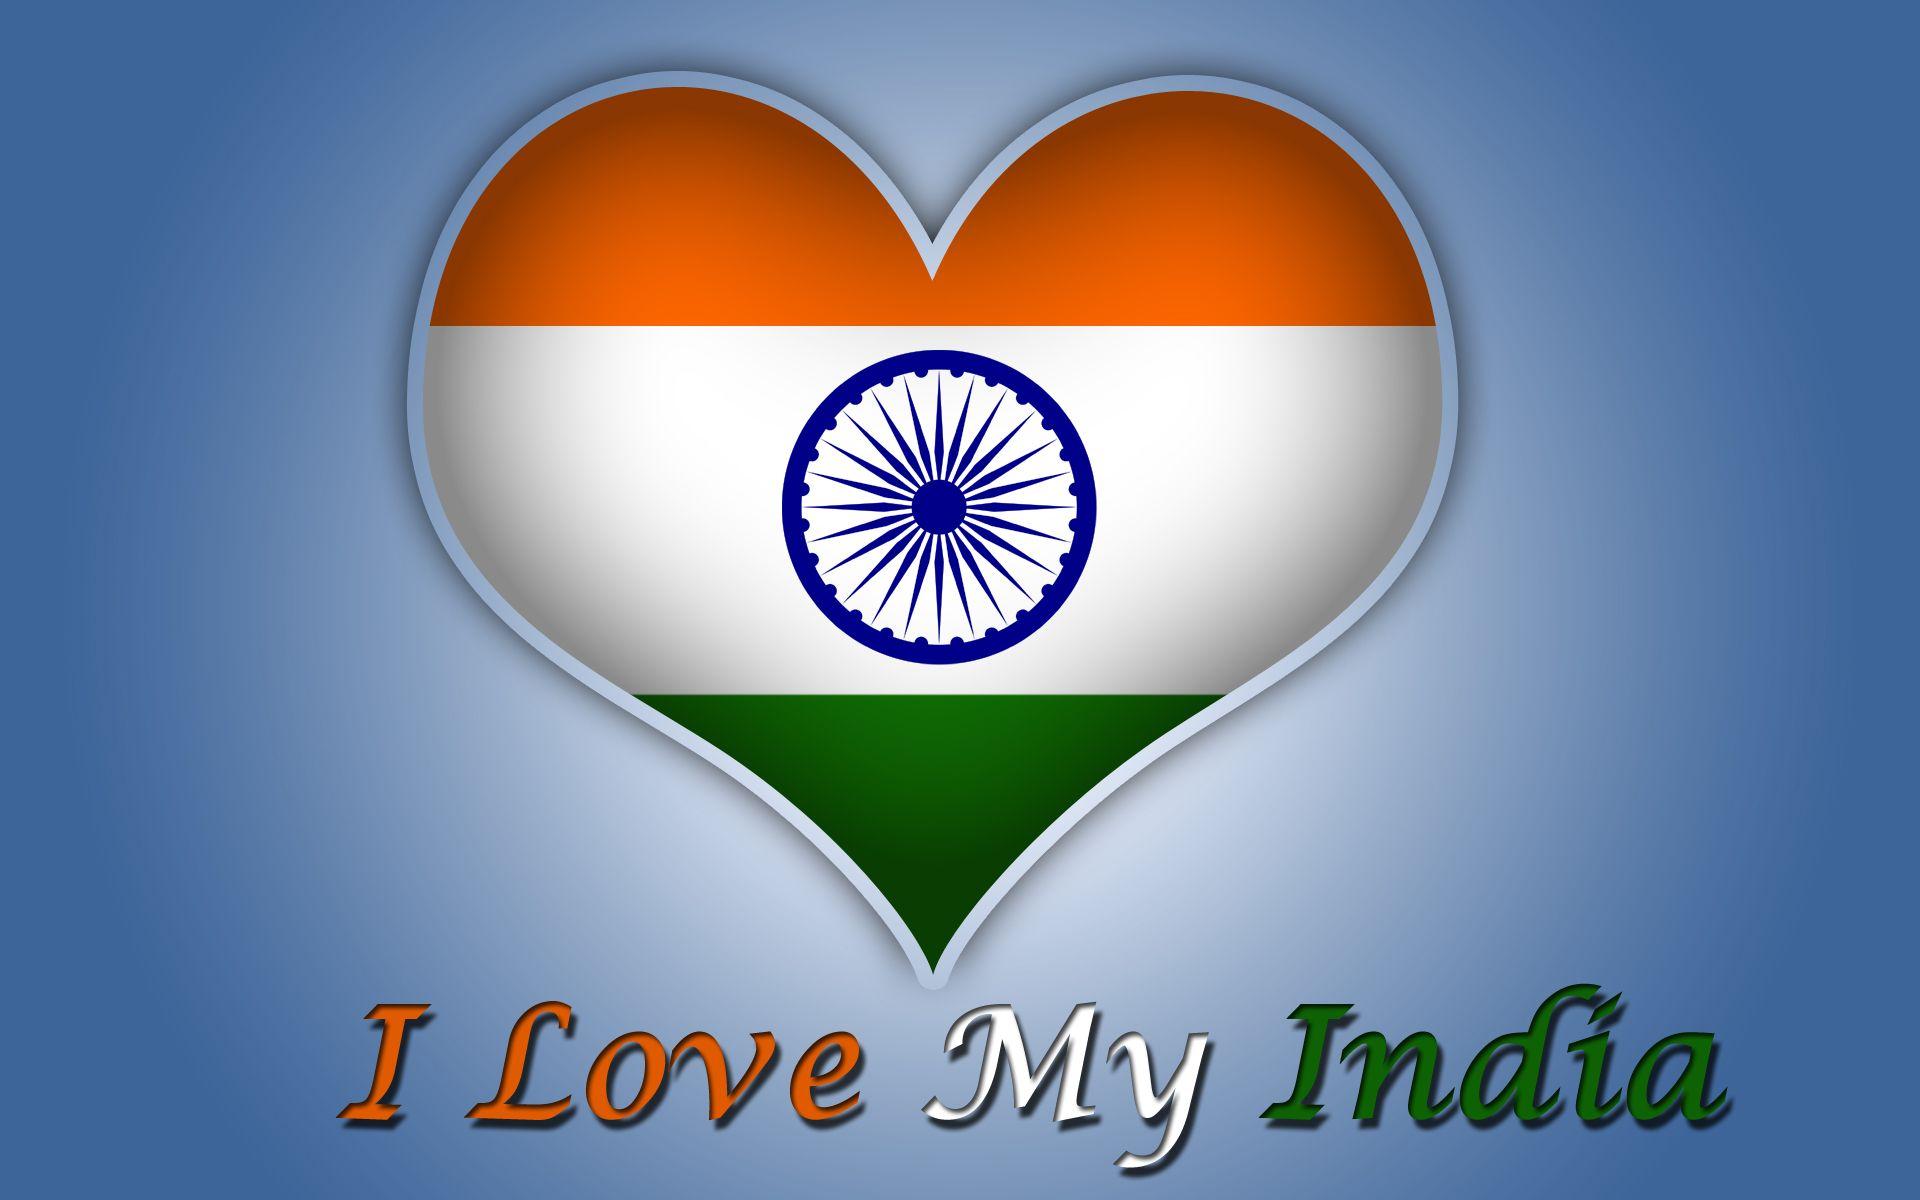 L Love My India Wallpapers - Wallpaper Cave